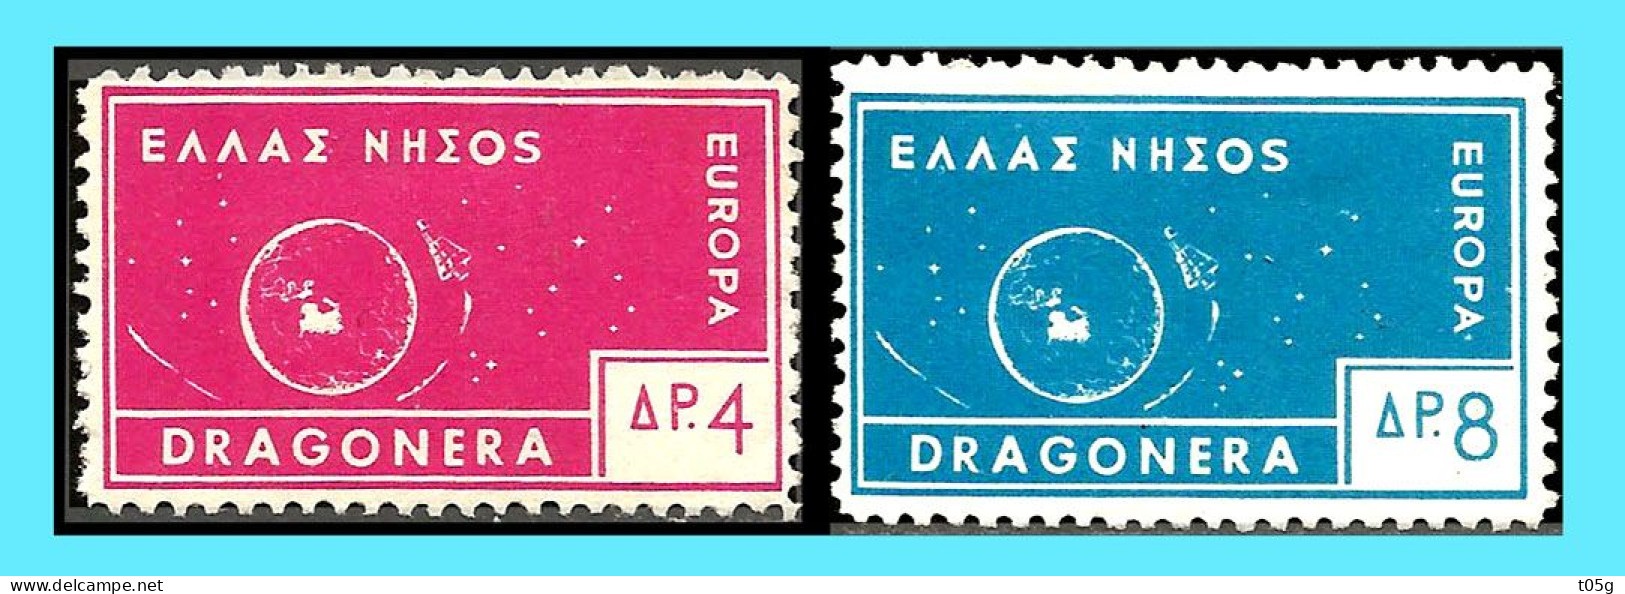 GREECE-GRECE-HELLAS - ITALY- IONIAN DRAGONERA ISLAND -EUROPA 1963: Unofficial -private Issue - Compl. Set  MNH** - Unused Stamps